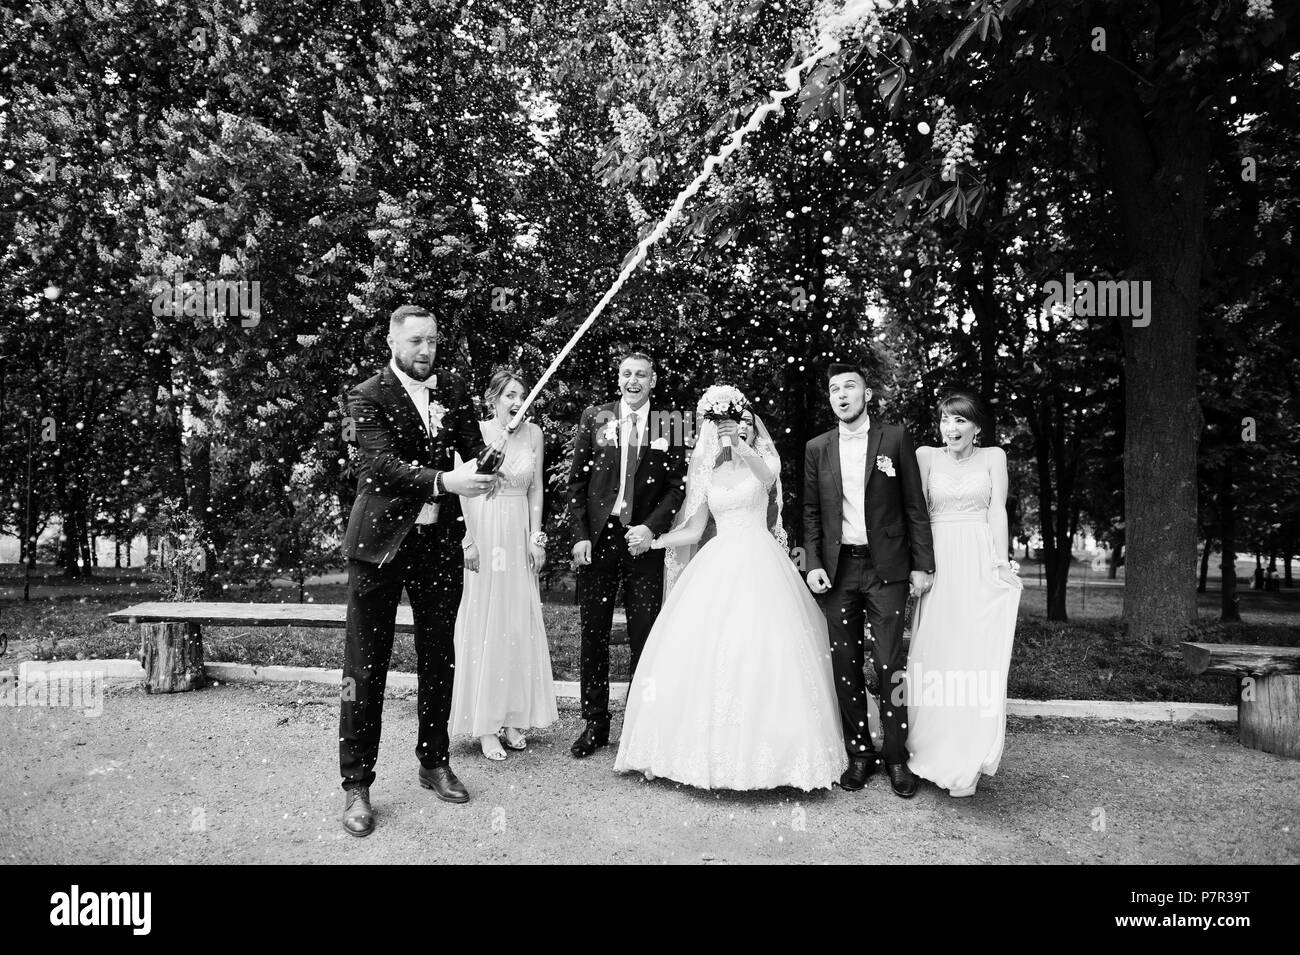 Groomsman opening up the bottle of champagne in the park with wedding couple and braidsmaids with groomsman standing by. Black and white photo. Stock Photo